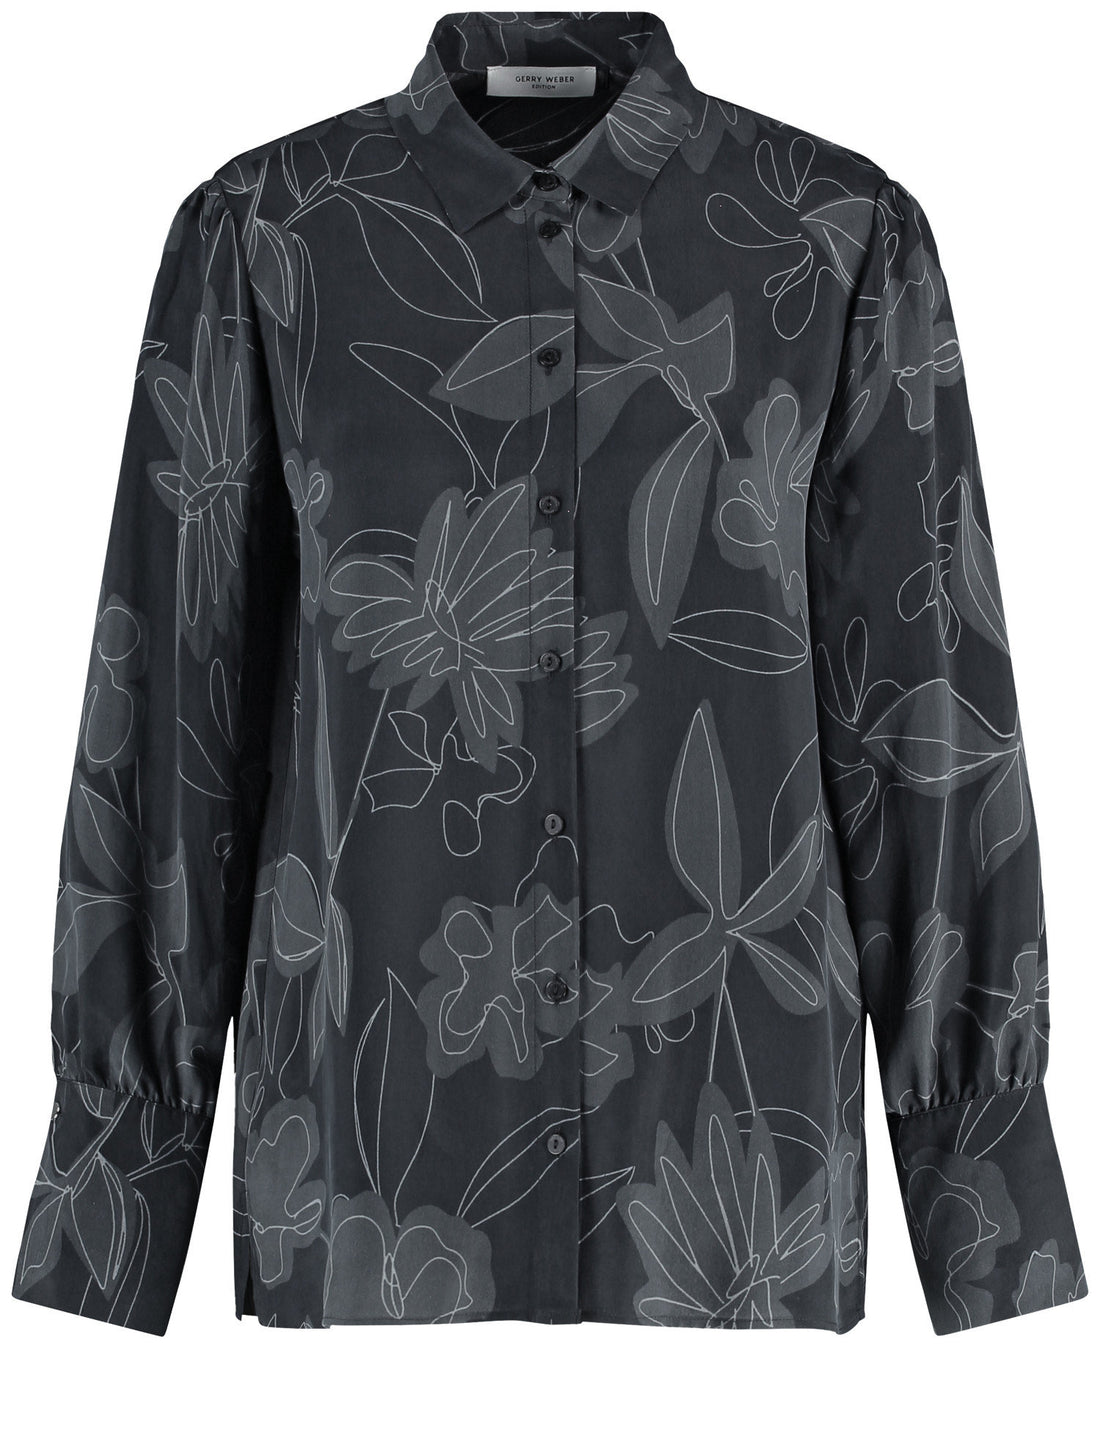 Long Sleeve Blouse With A Floral Pattern And Hem Slits_160062-66452_1039_01